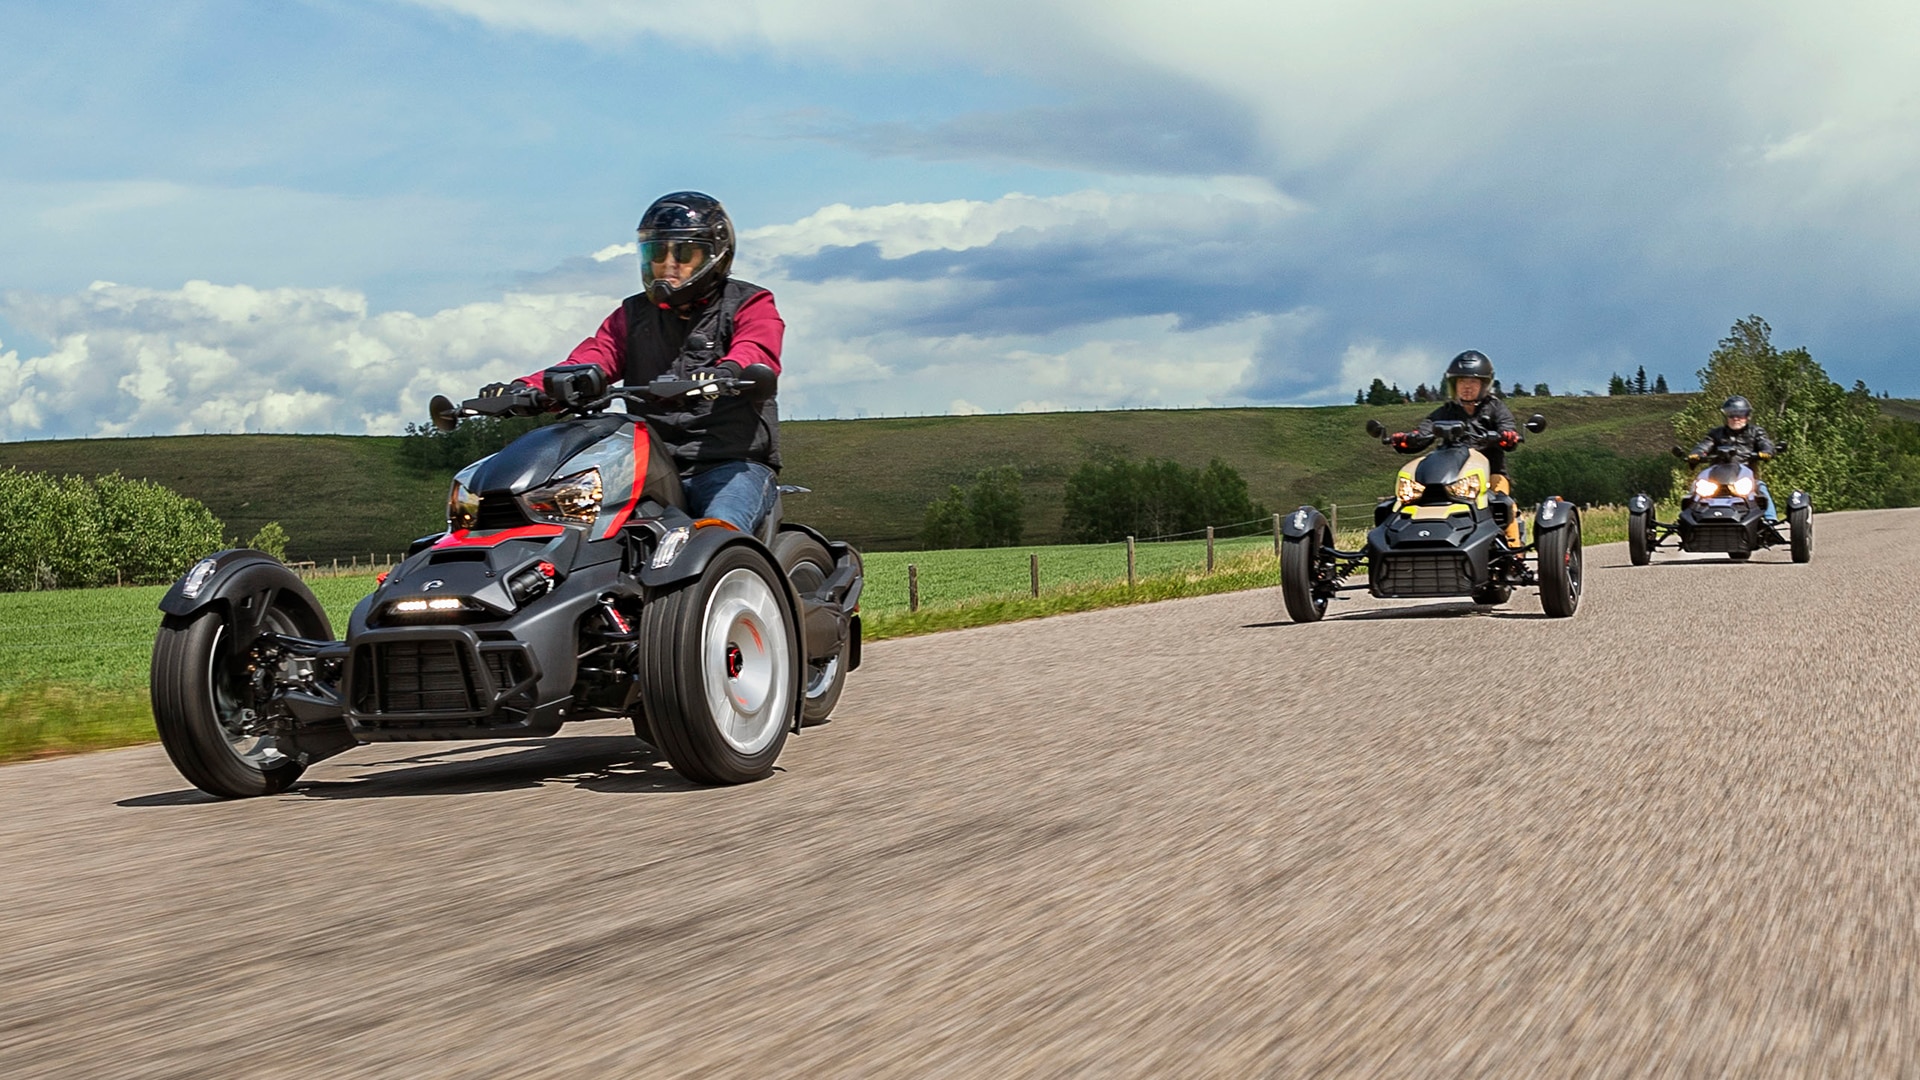 Three Can-Am Spyder on the road